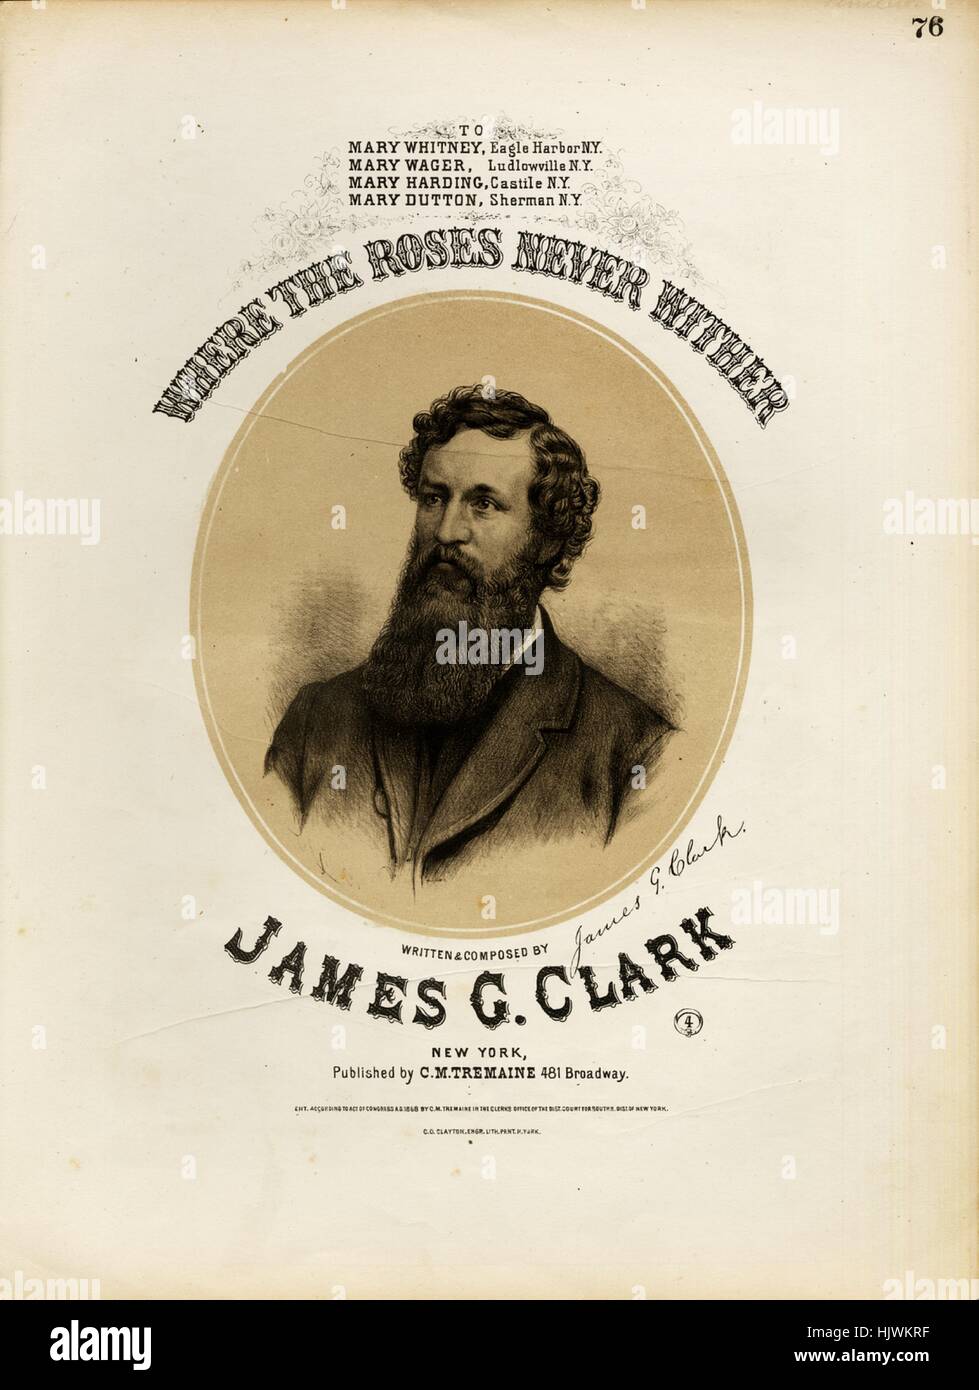 Sheet music cover image of the song 'Where the Roses Never Wither', with original authorship notes reading 'Written and Composed by James G Clark', United States, 1868. The publisher is listed as 'C.M. Tremaine, 481 Broadway', the form of composition is 'strophic with chorus', the instrumentation is 'piano and voice', the first line reads 'Where the roses ne'er shall wither, nor the clouds of sorrow gather', and the illustration artist is listed as 'C.O. Clayton, Engr. Lith. Print. N. York'. Stock Photo